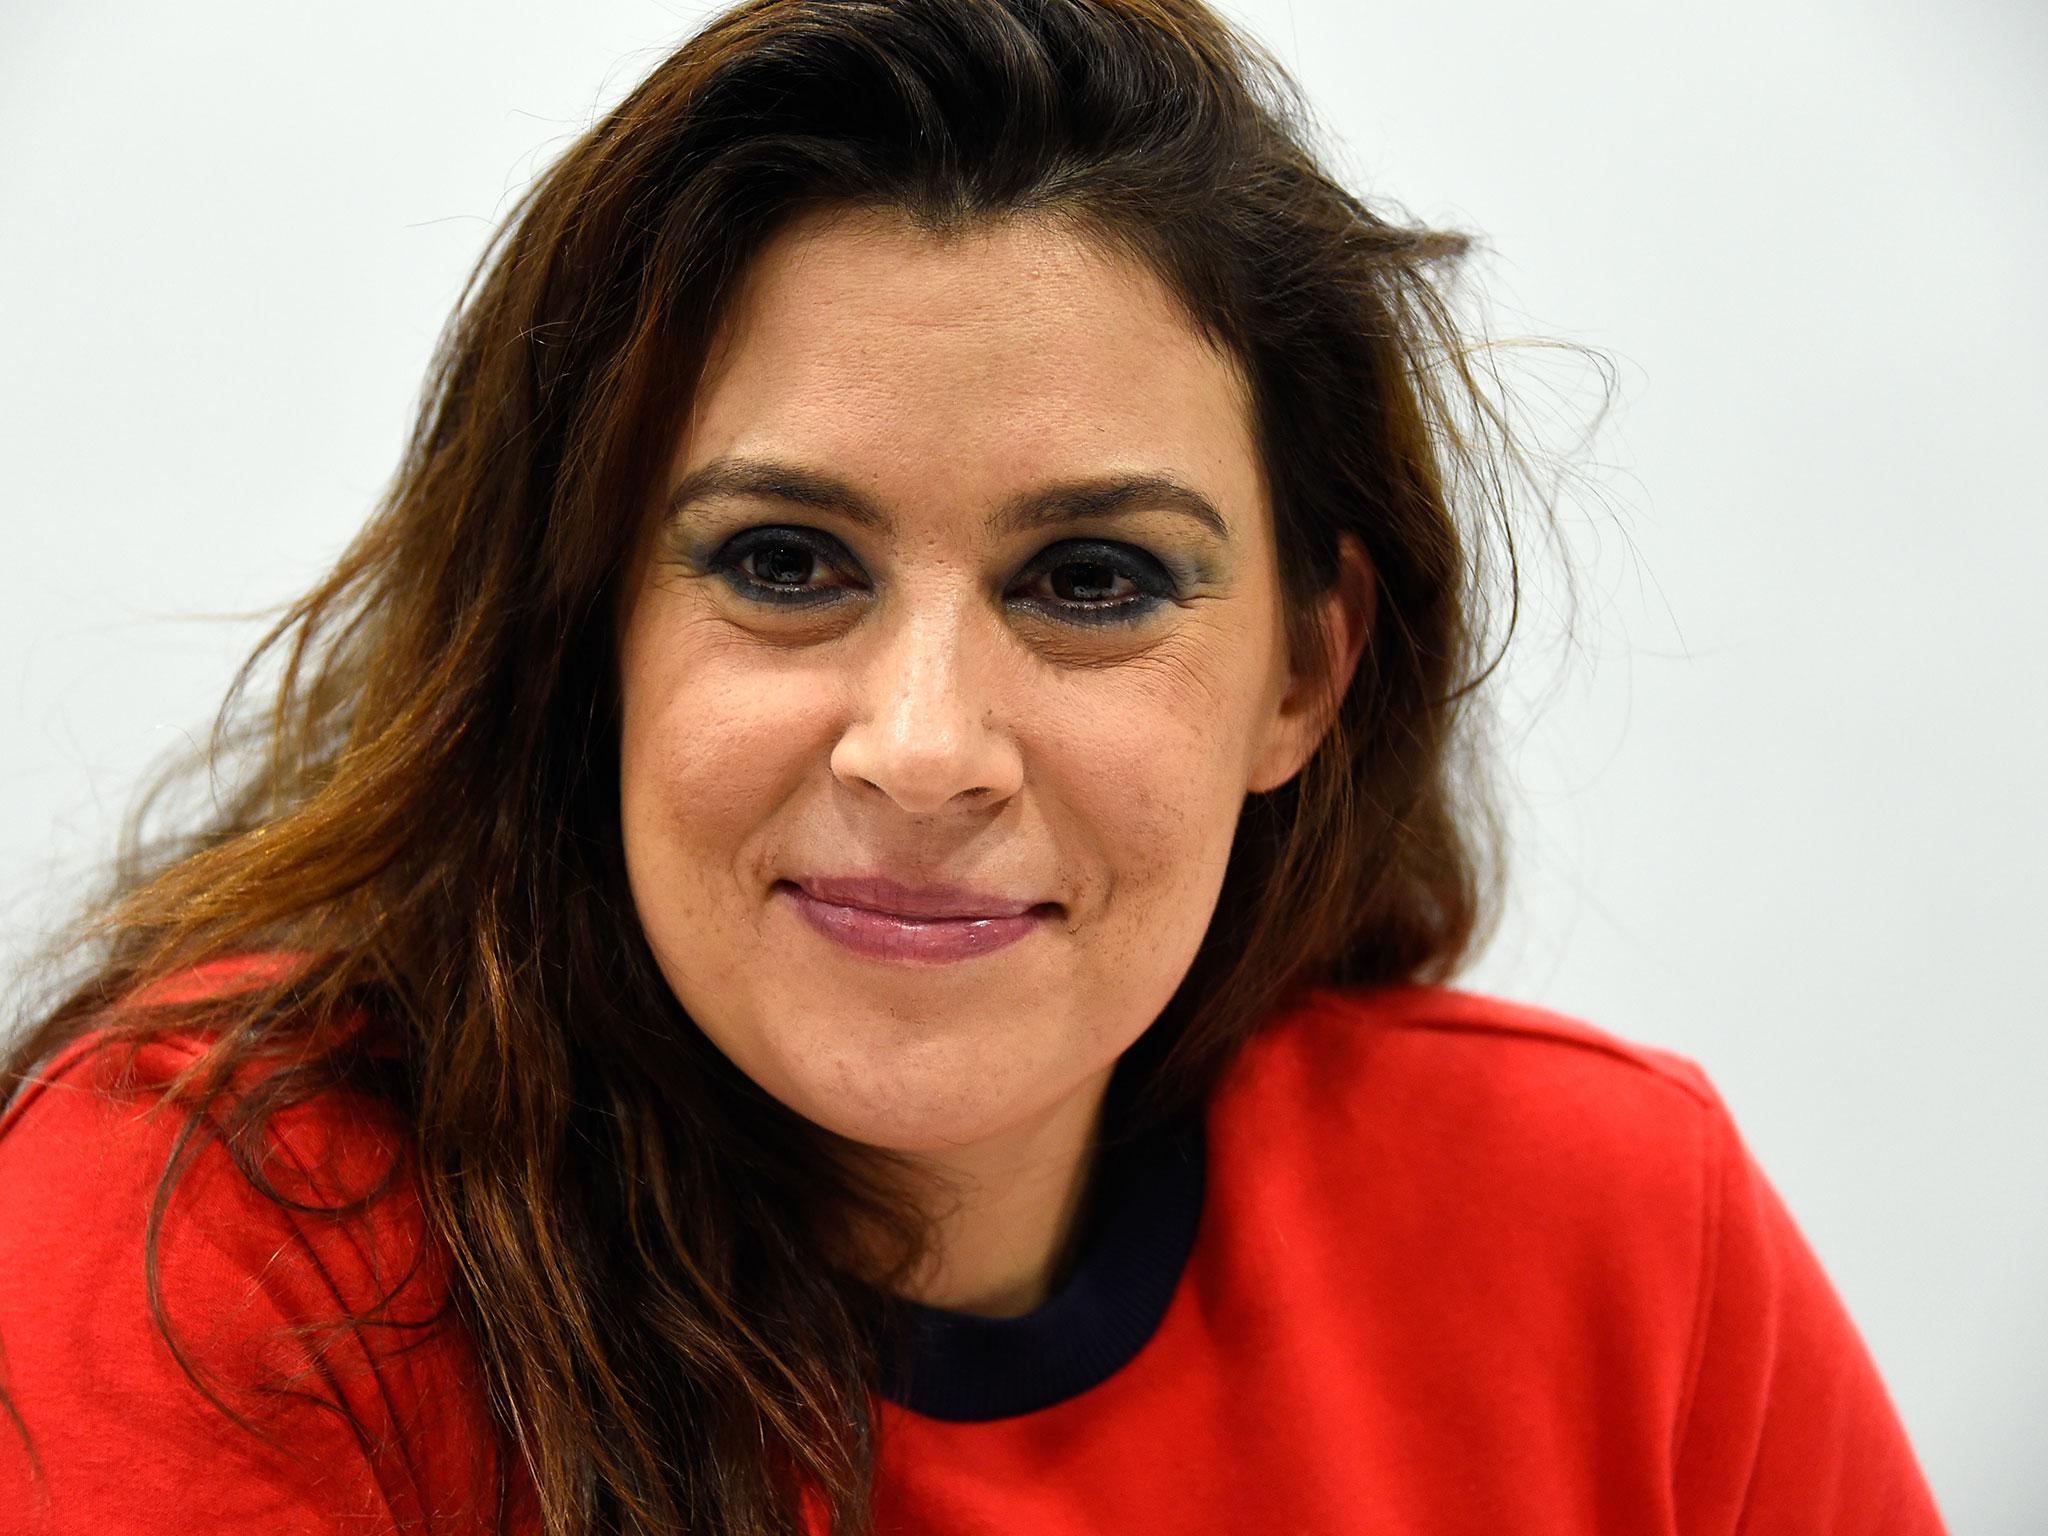 Marion Bartoli said she can't wait to return to competitive action